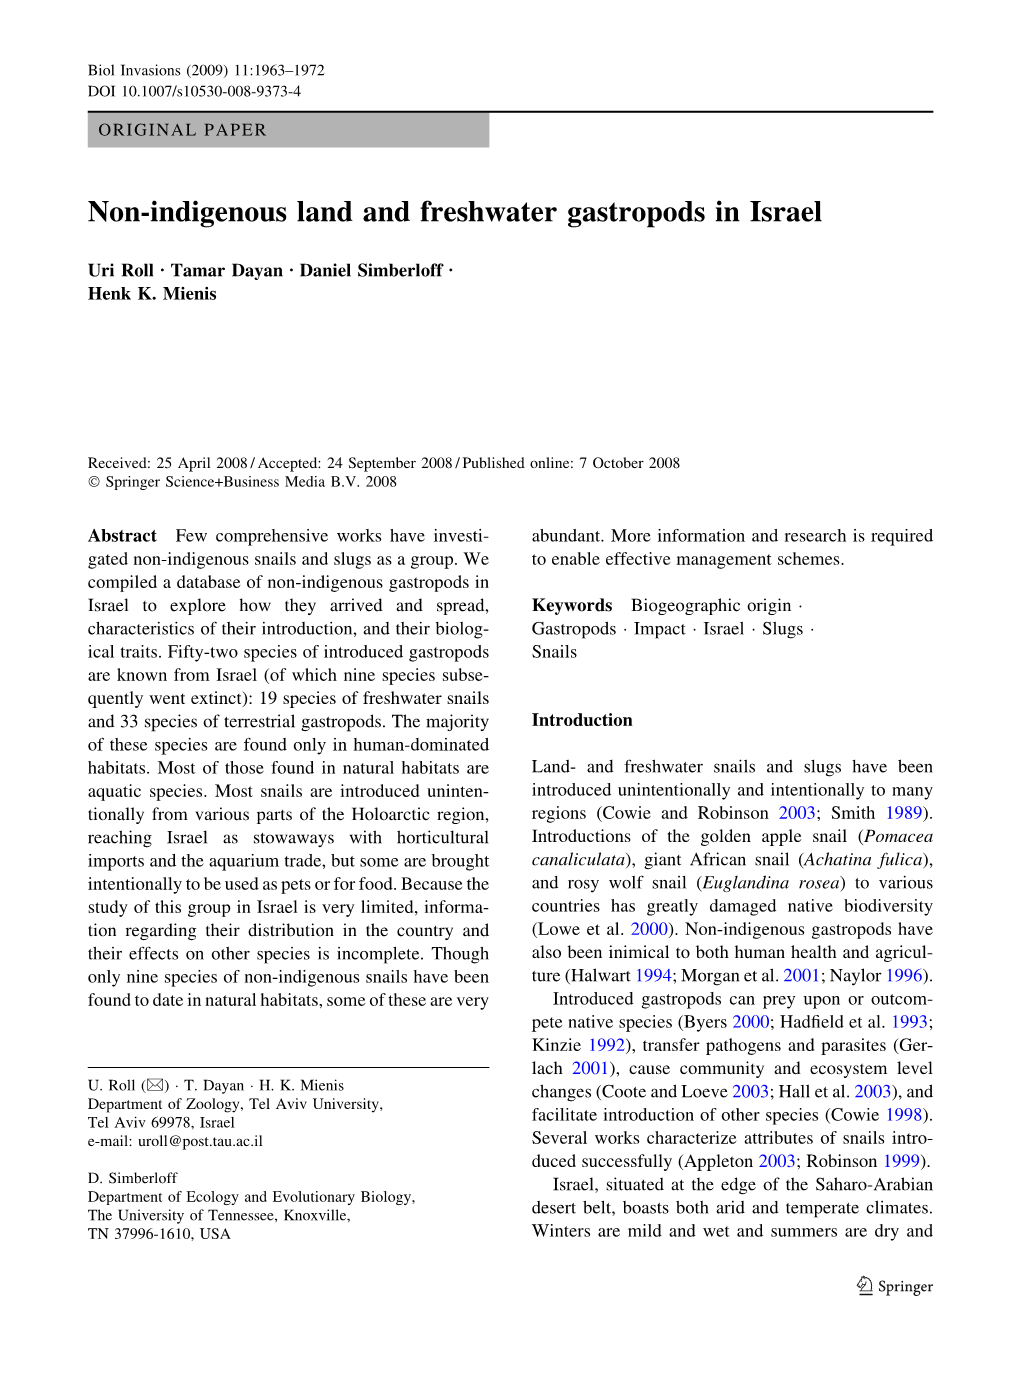 Non-Indigenous Land and Freshwater Gastropods in Israel